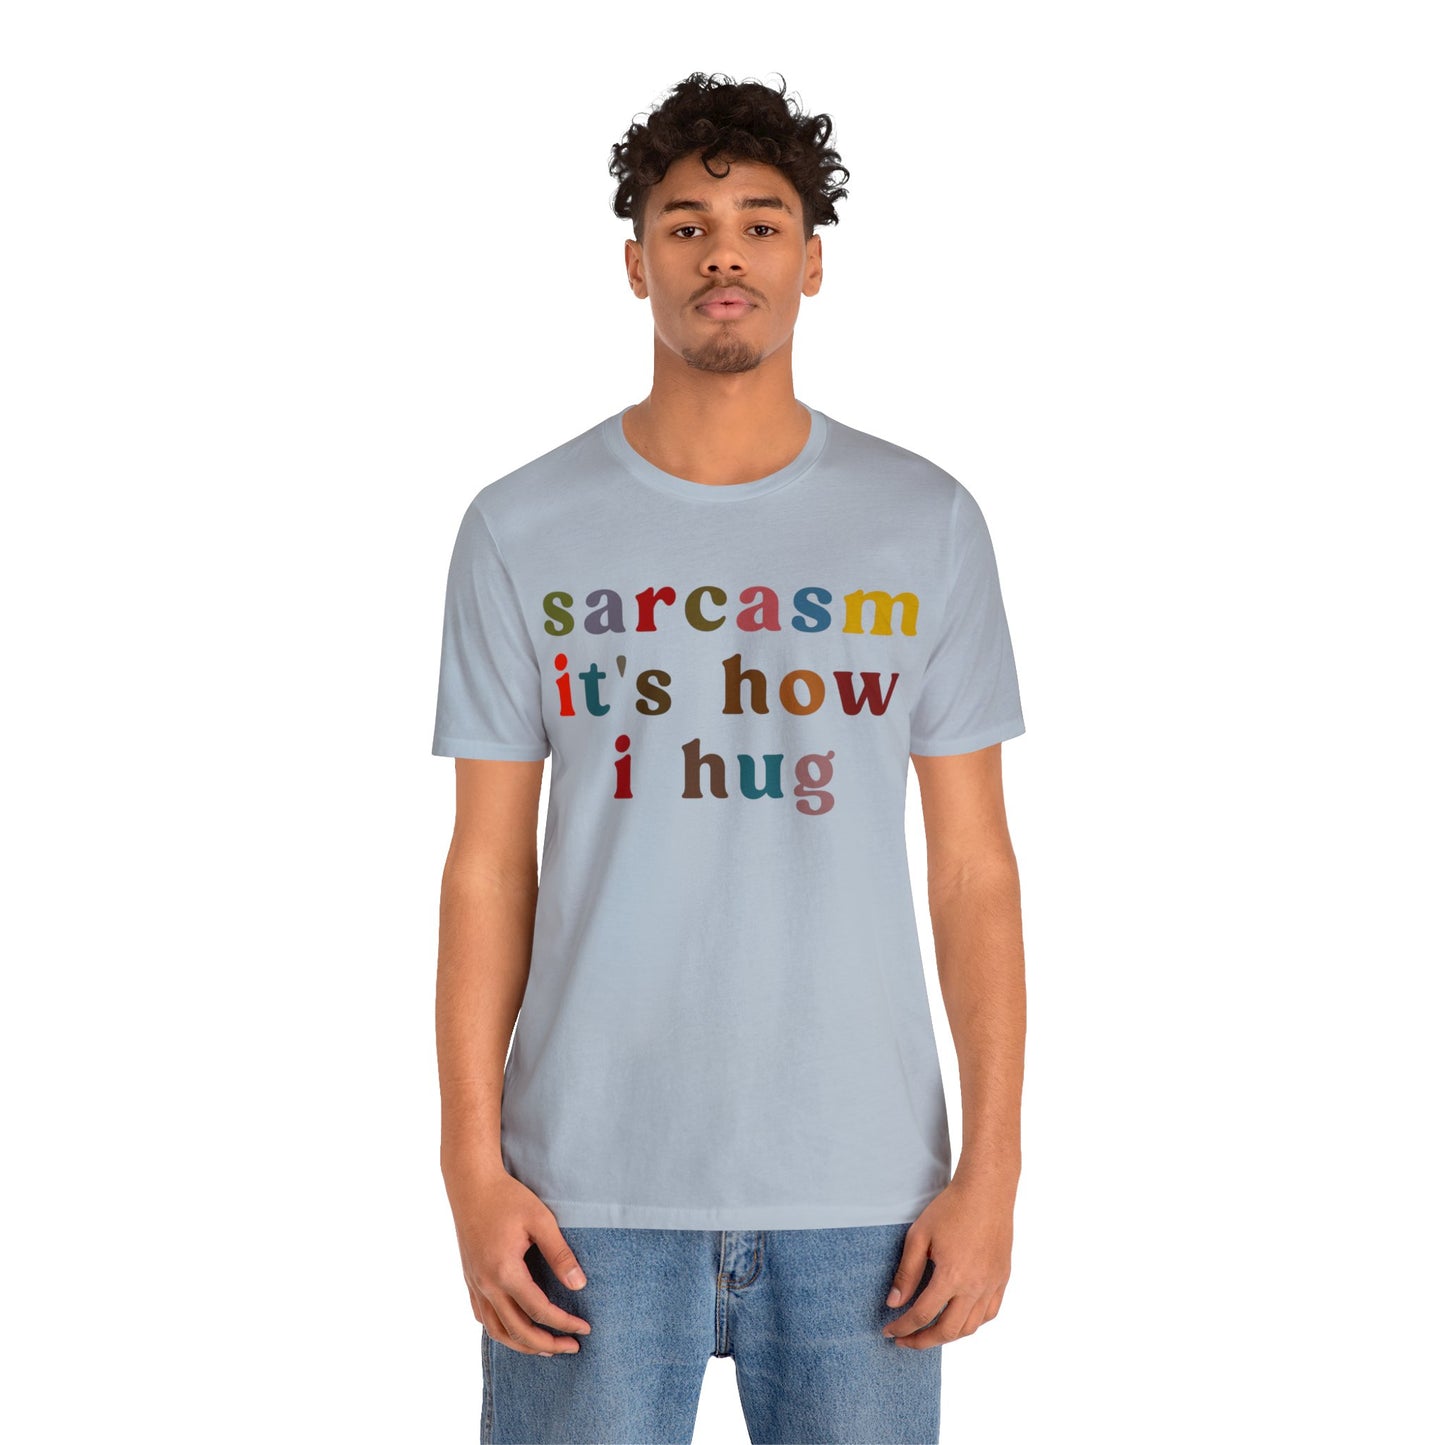 Sarcasm It's How I Hug Shirt, Sarcastic Quote Shirt, Sarcasm Women Shirt, Funny Mom Shirt, Shirt for Women, Gift for Her, Mom Shirt, T1260